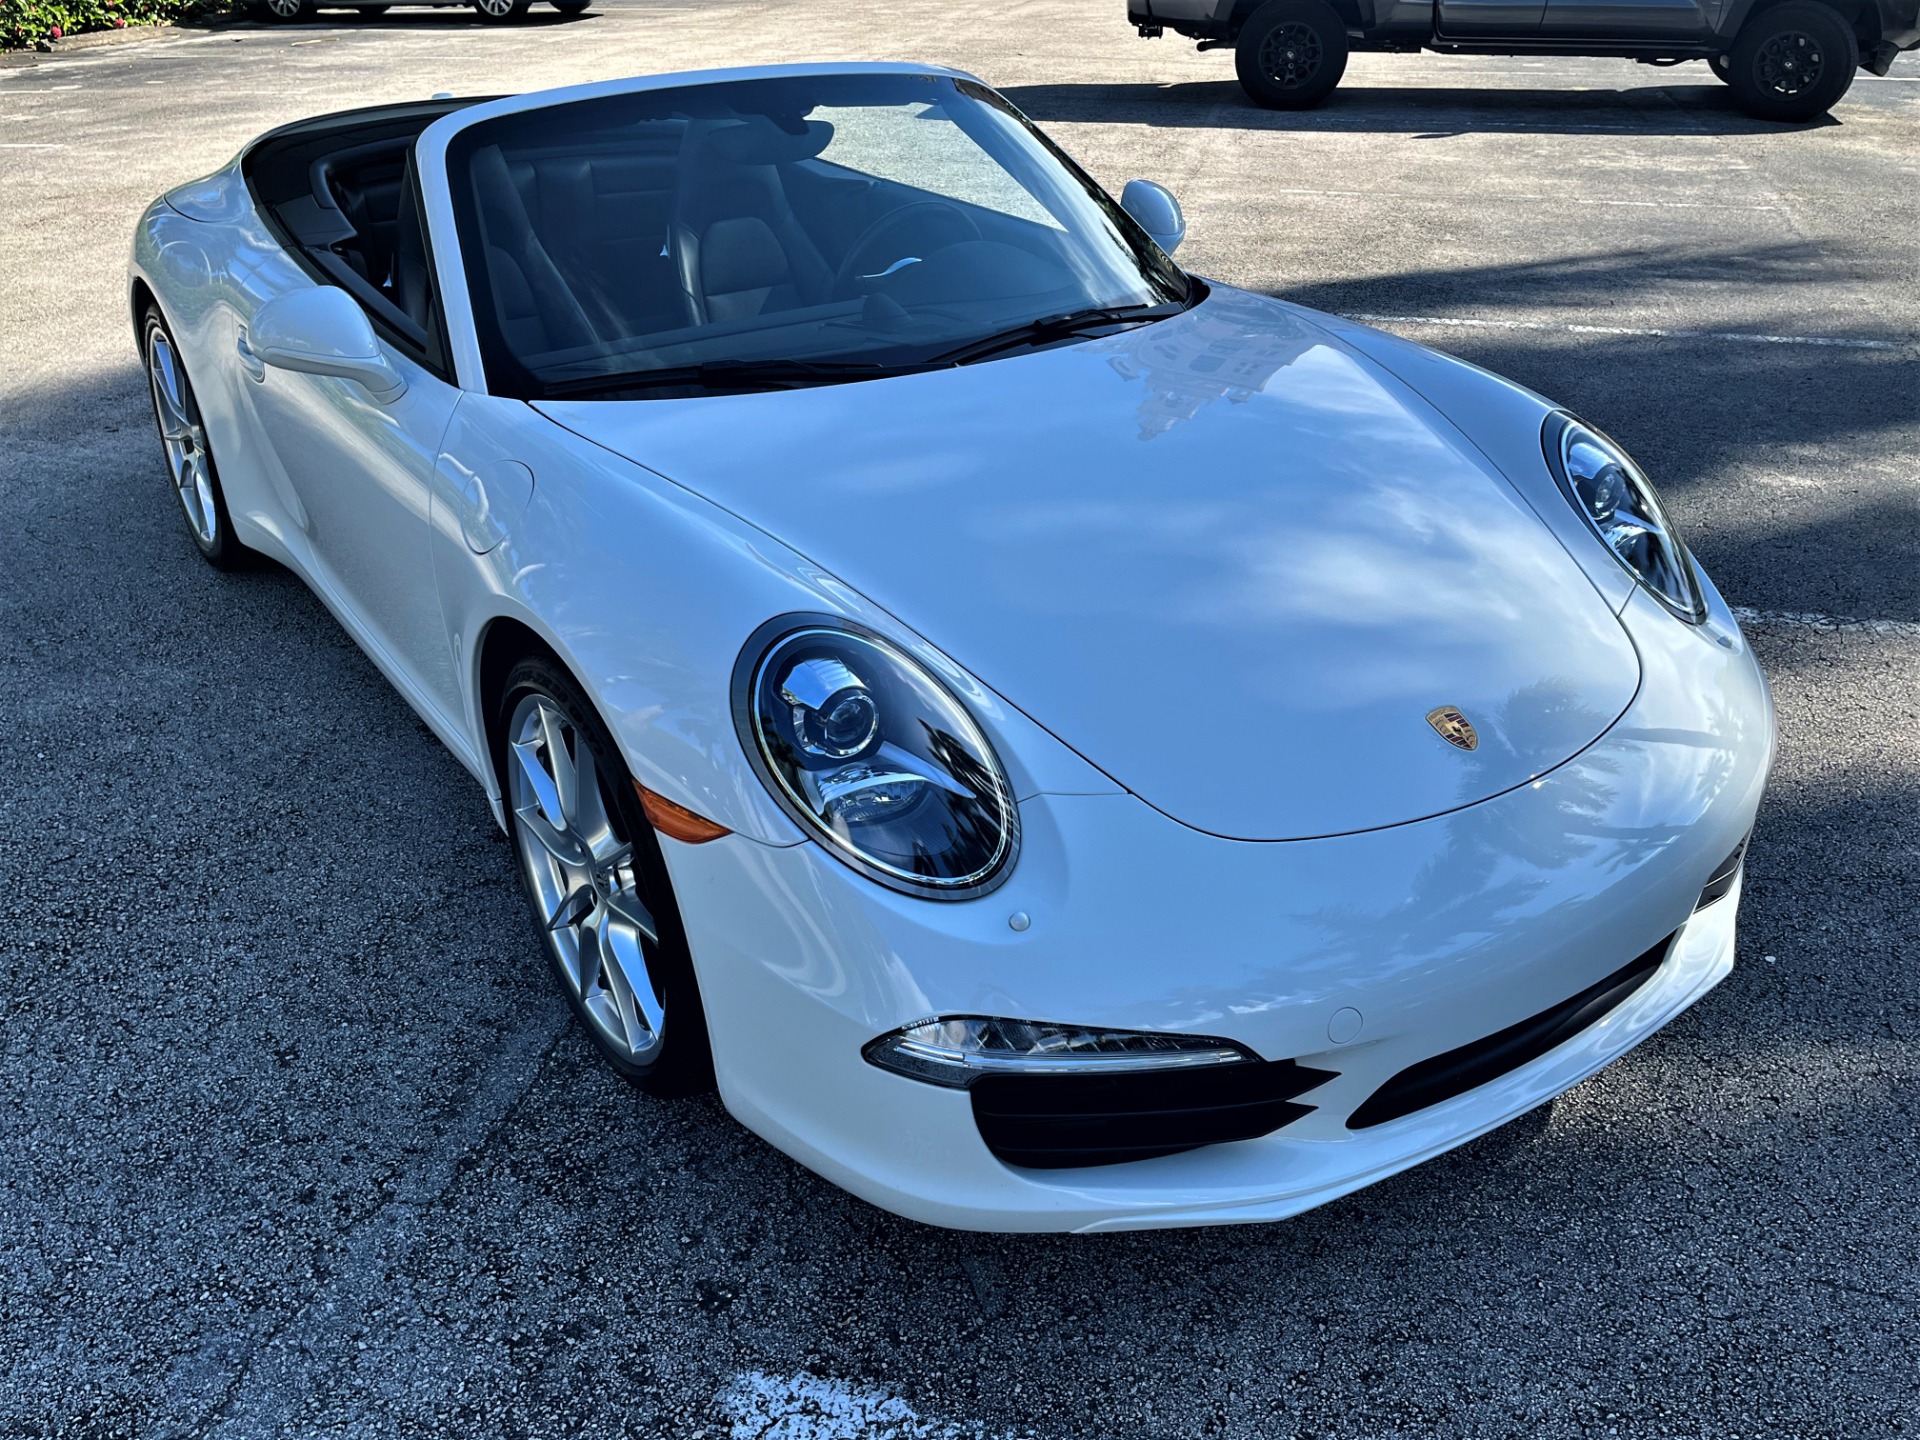 Used 2014 Porsche 911 Carrera for sale Sold at The Gables Sports Cars in Miami FL 33146 3